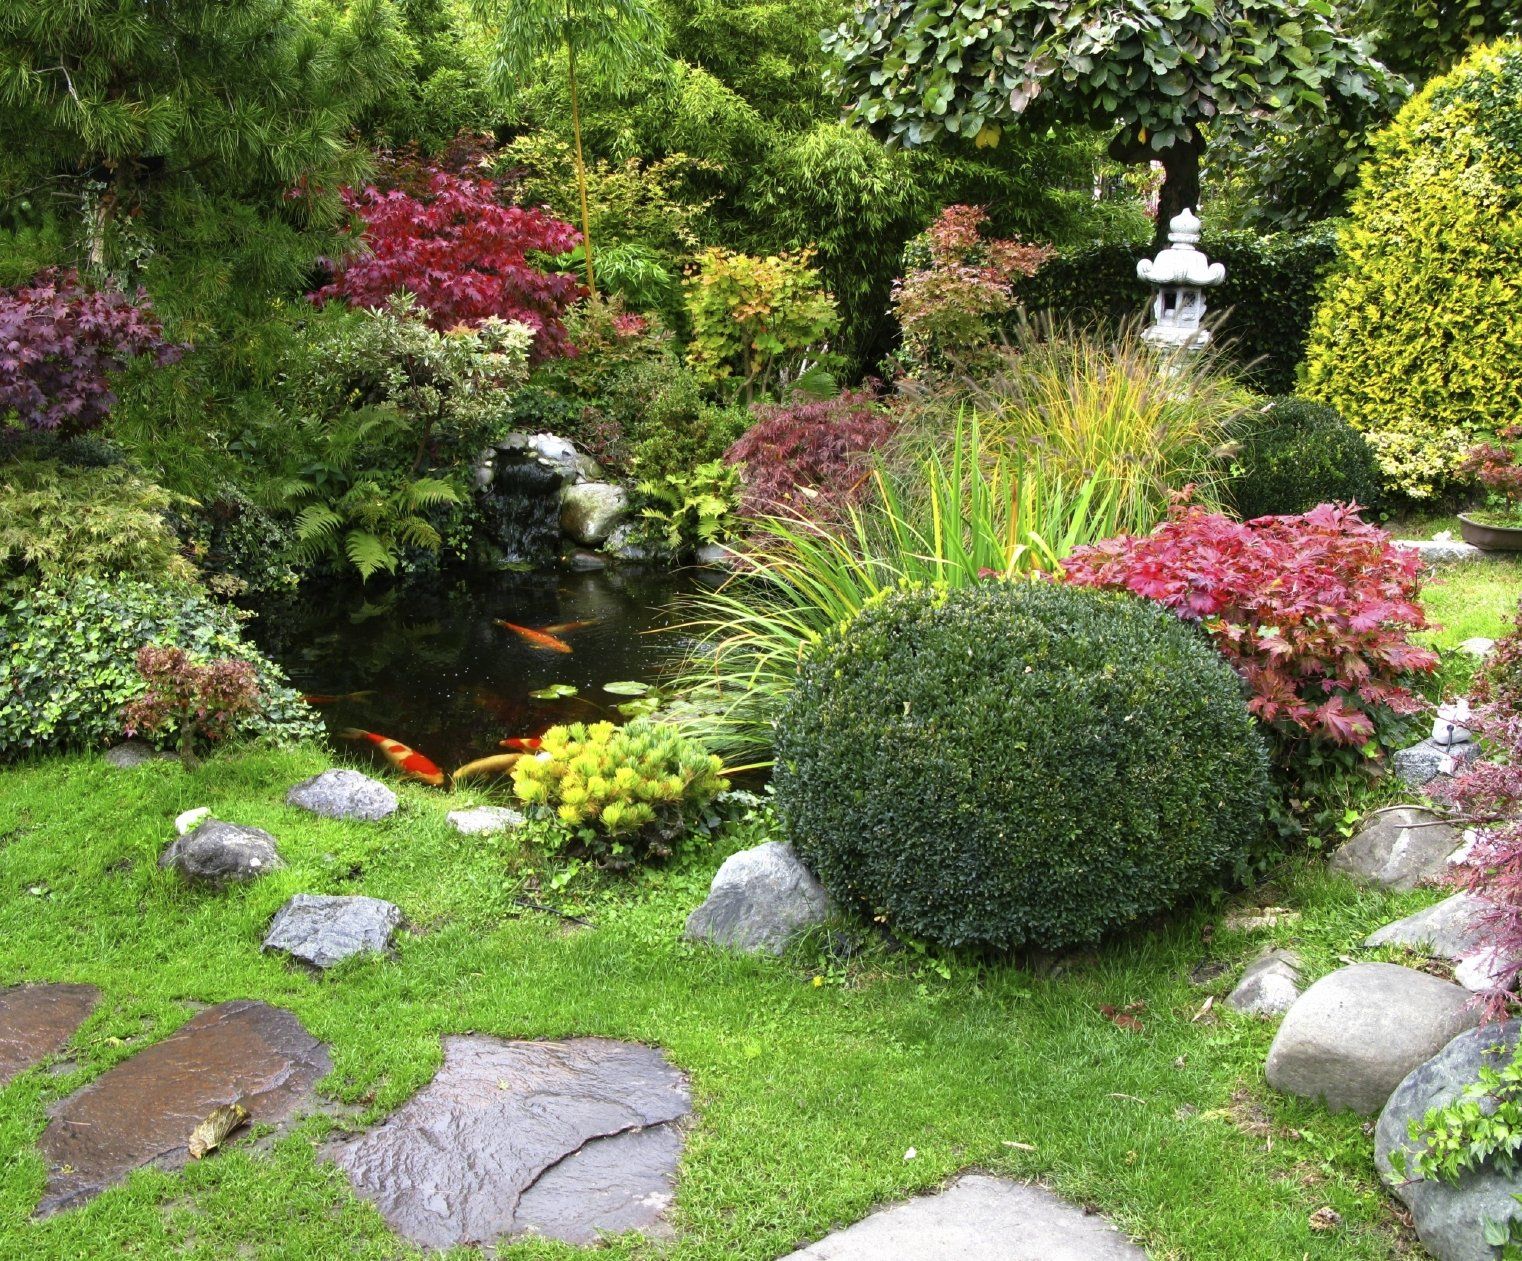 A beautiful flower garden with a gold fish pond.